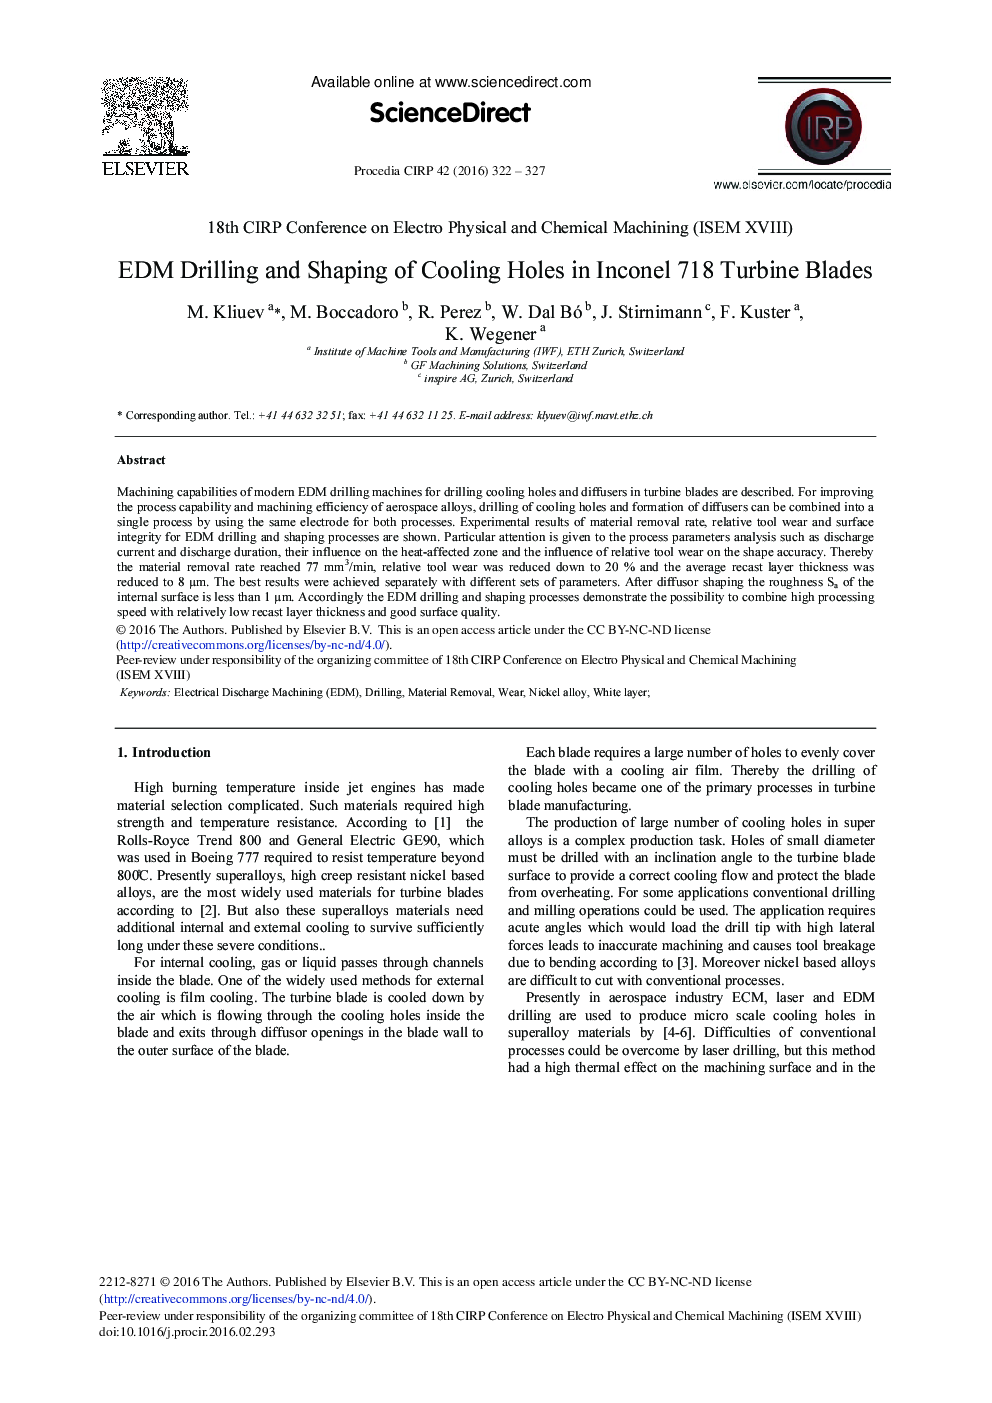 EDM Drilling and Shaping of Cooling Holes in Inconel 718 Turbine Blades 